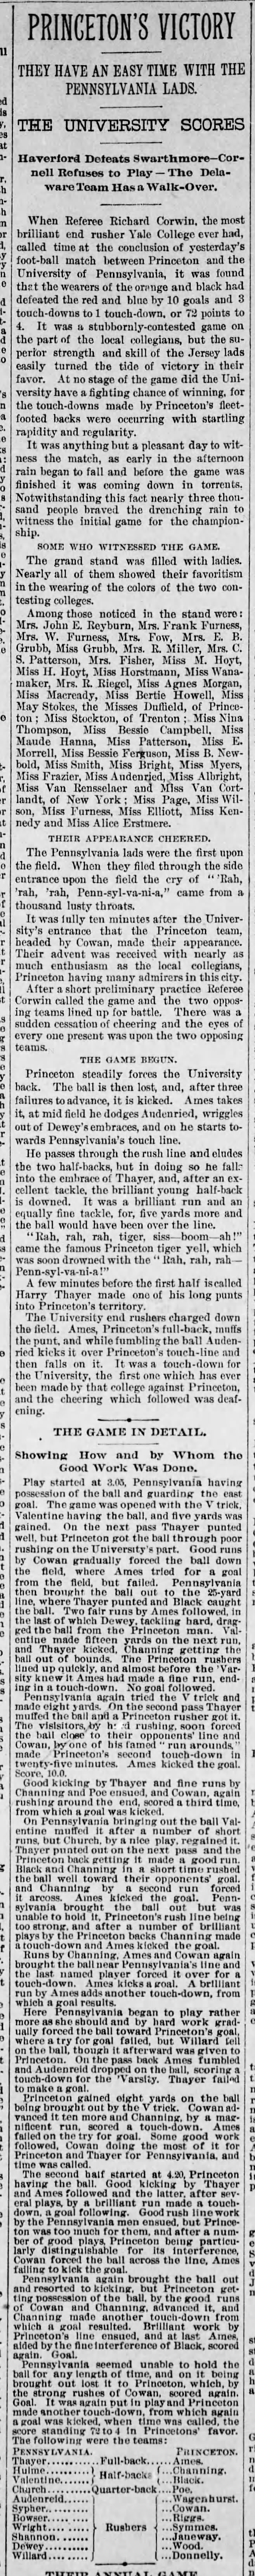 Princeton's Victory: They Have an Easy Time with the Pennsylvania Lads